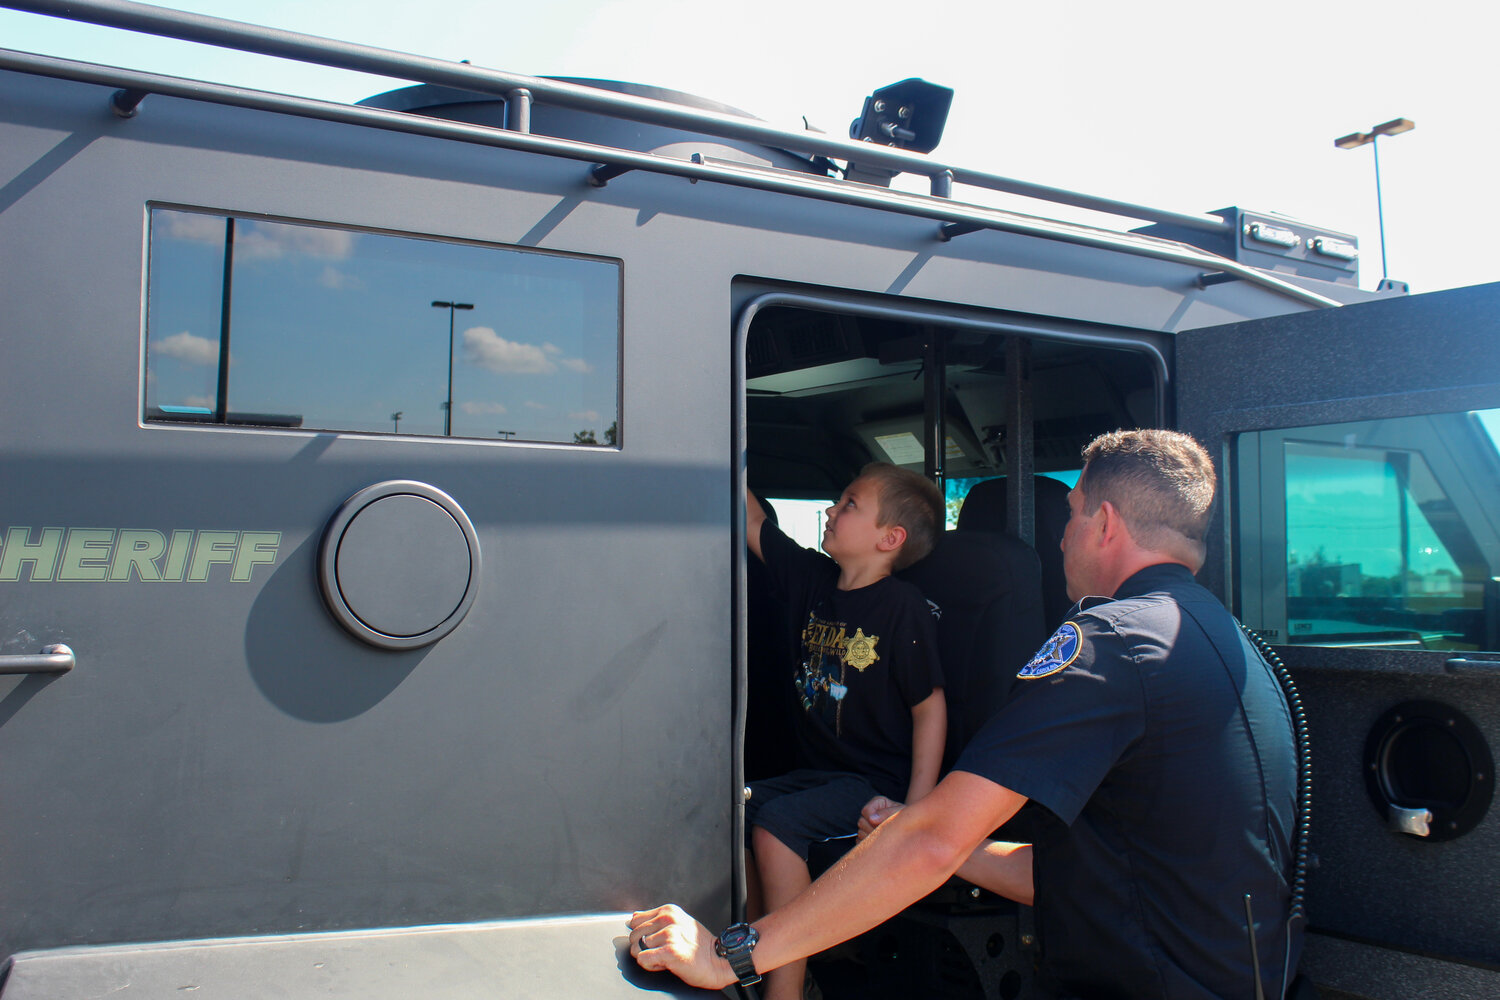 The Lexington County Sheriff's Department held a Touch a Truck event at Lexington High School Aug. 5.